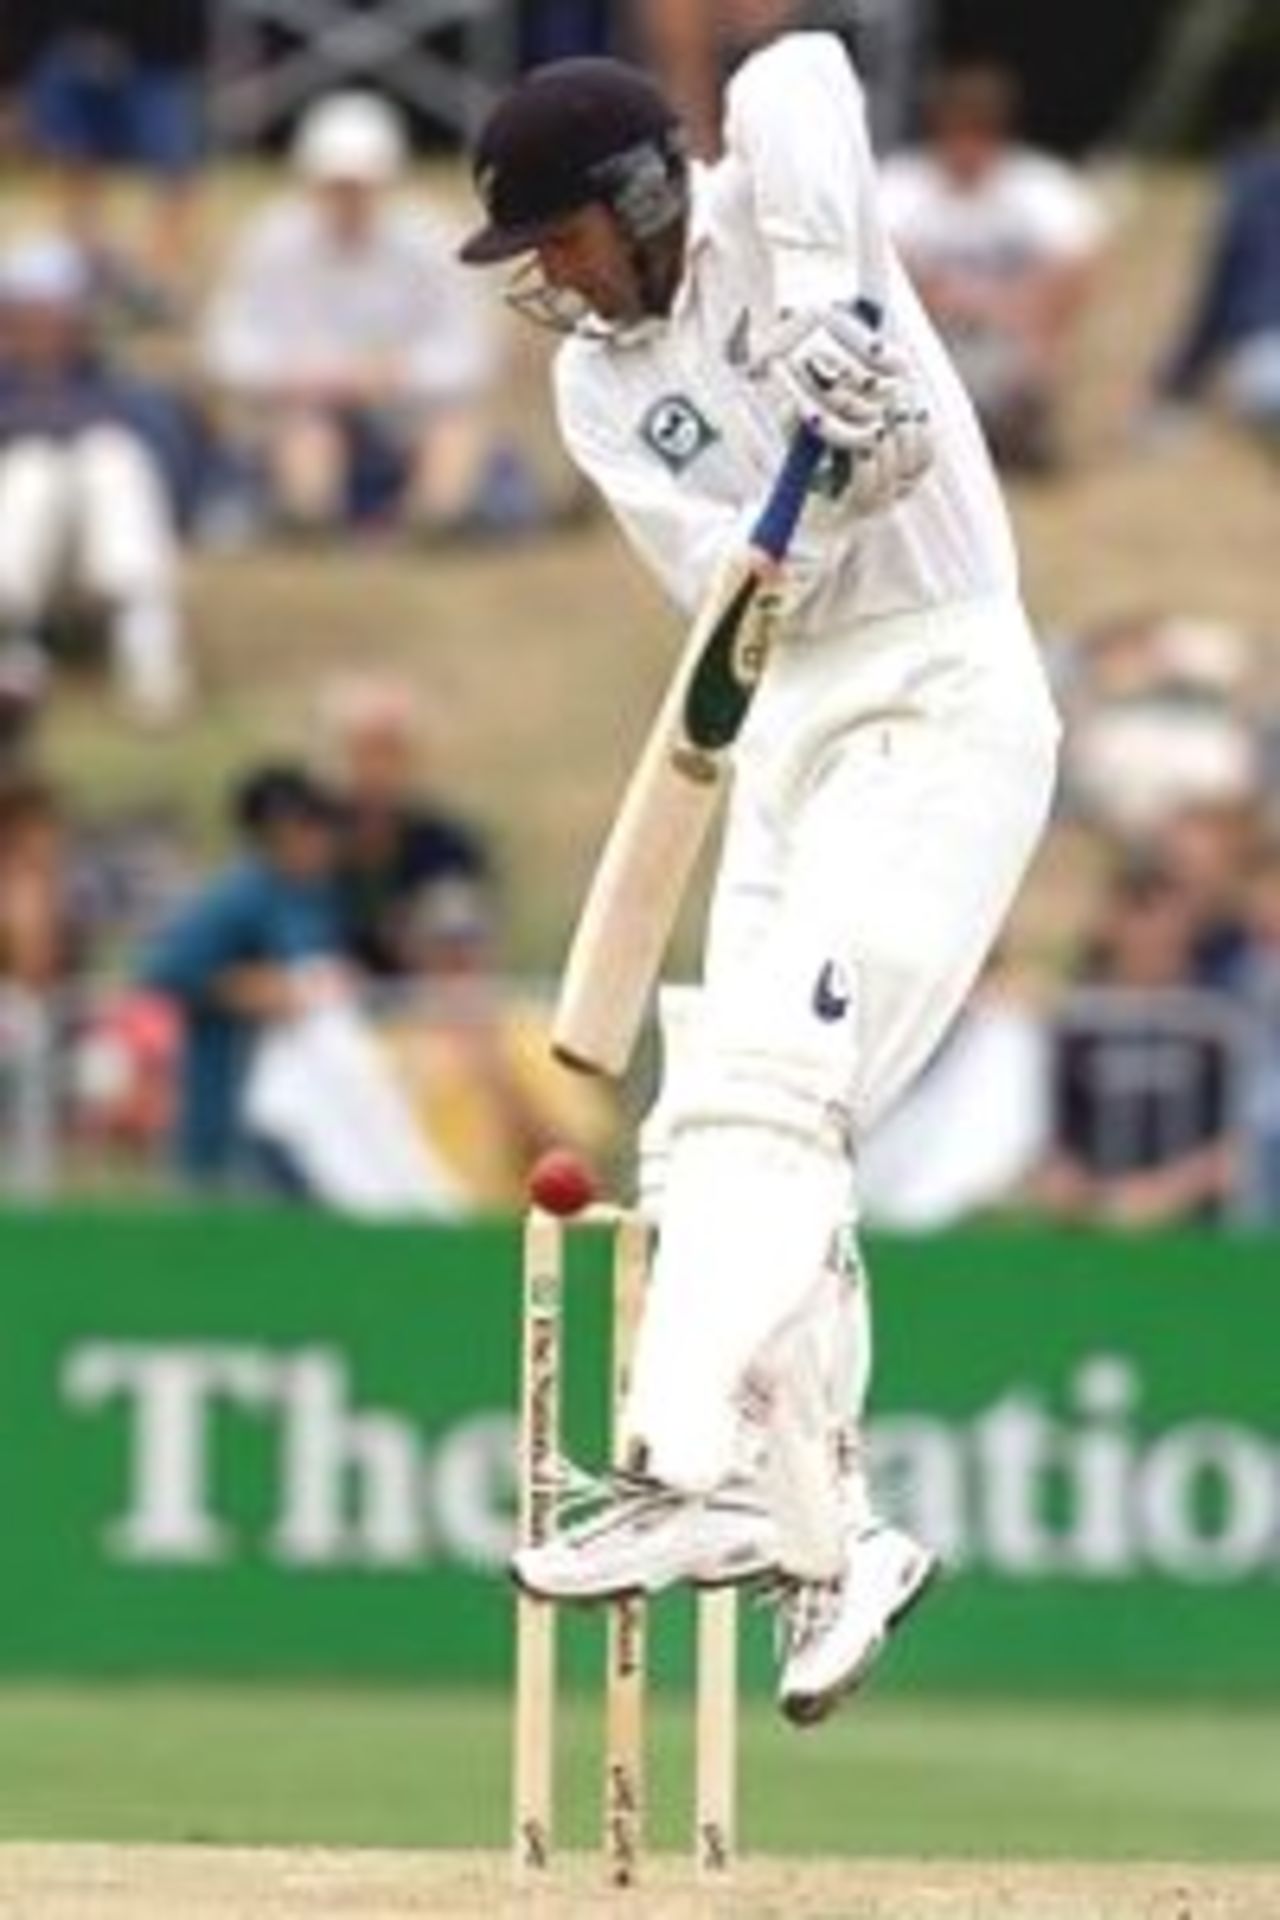 02 Apr 2000: Nathan Astle of New Zealand has to leap high to play a delivery, during day three of the third test between New Zealand and Australia, at WestpacTrust Park, Hamilton, New Zealand.